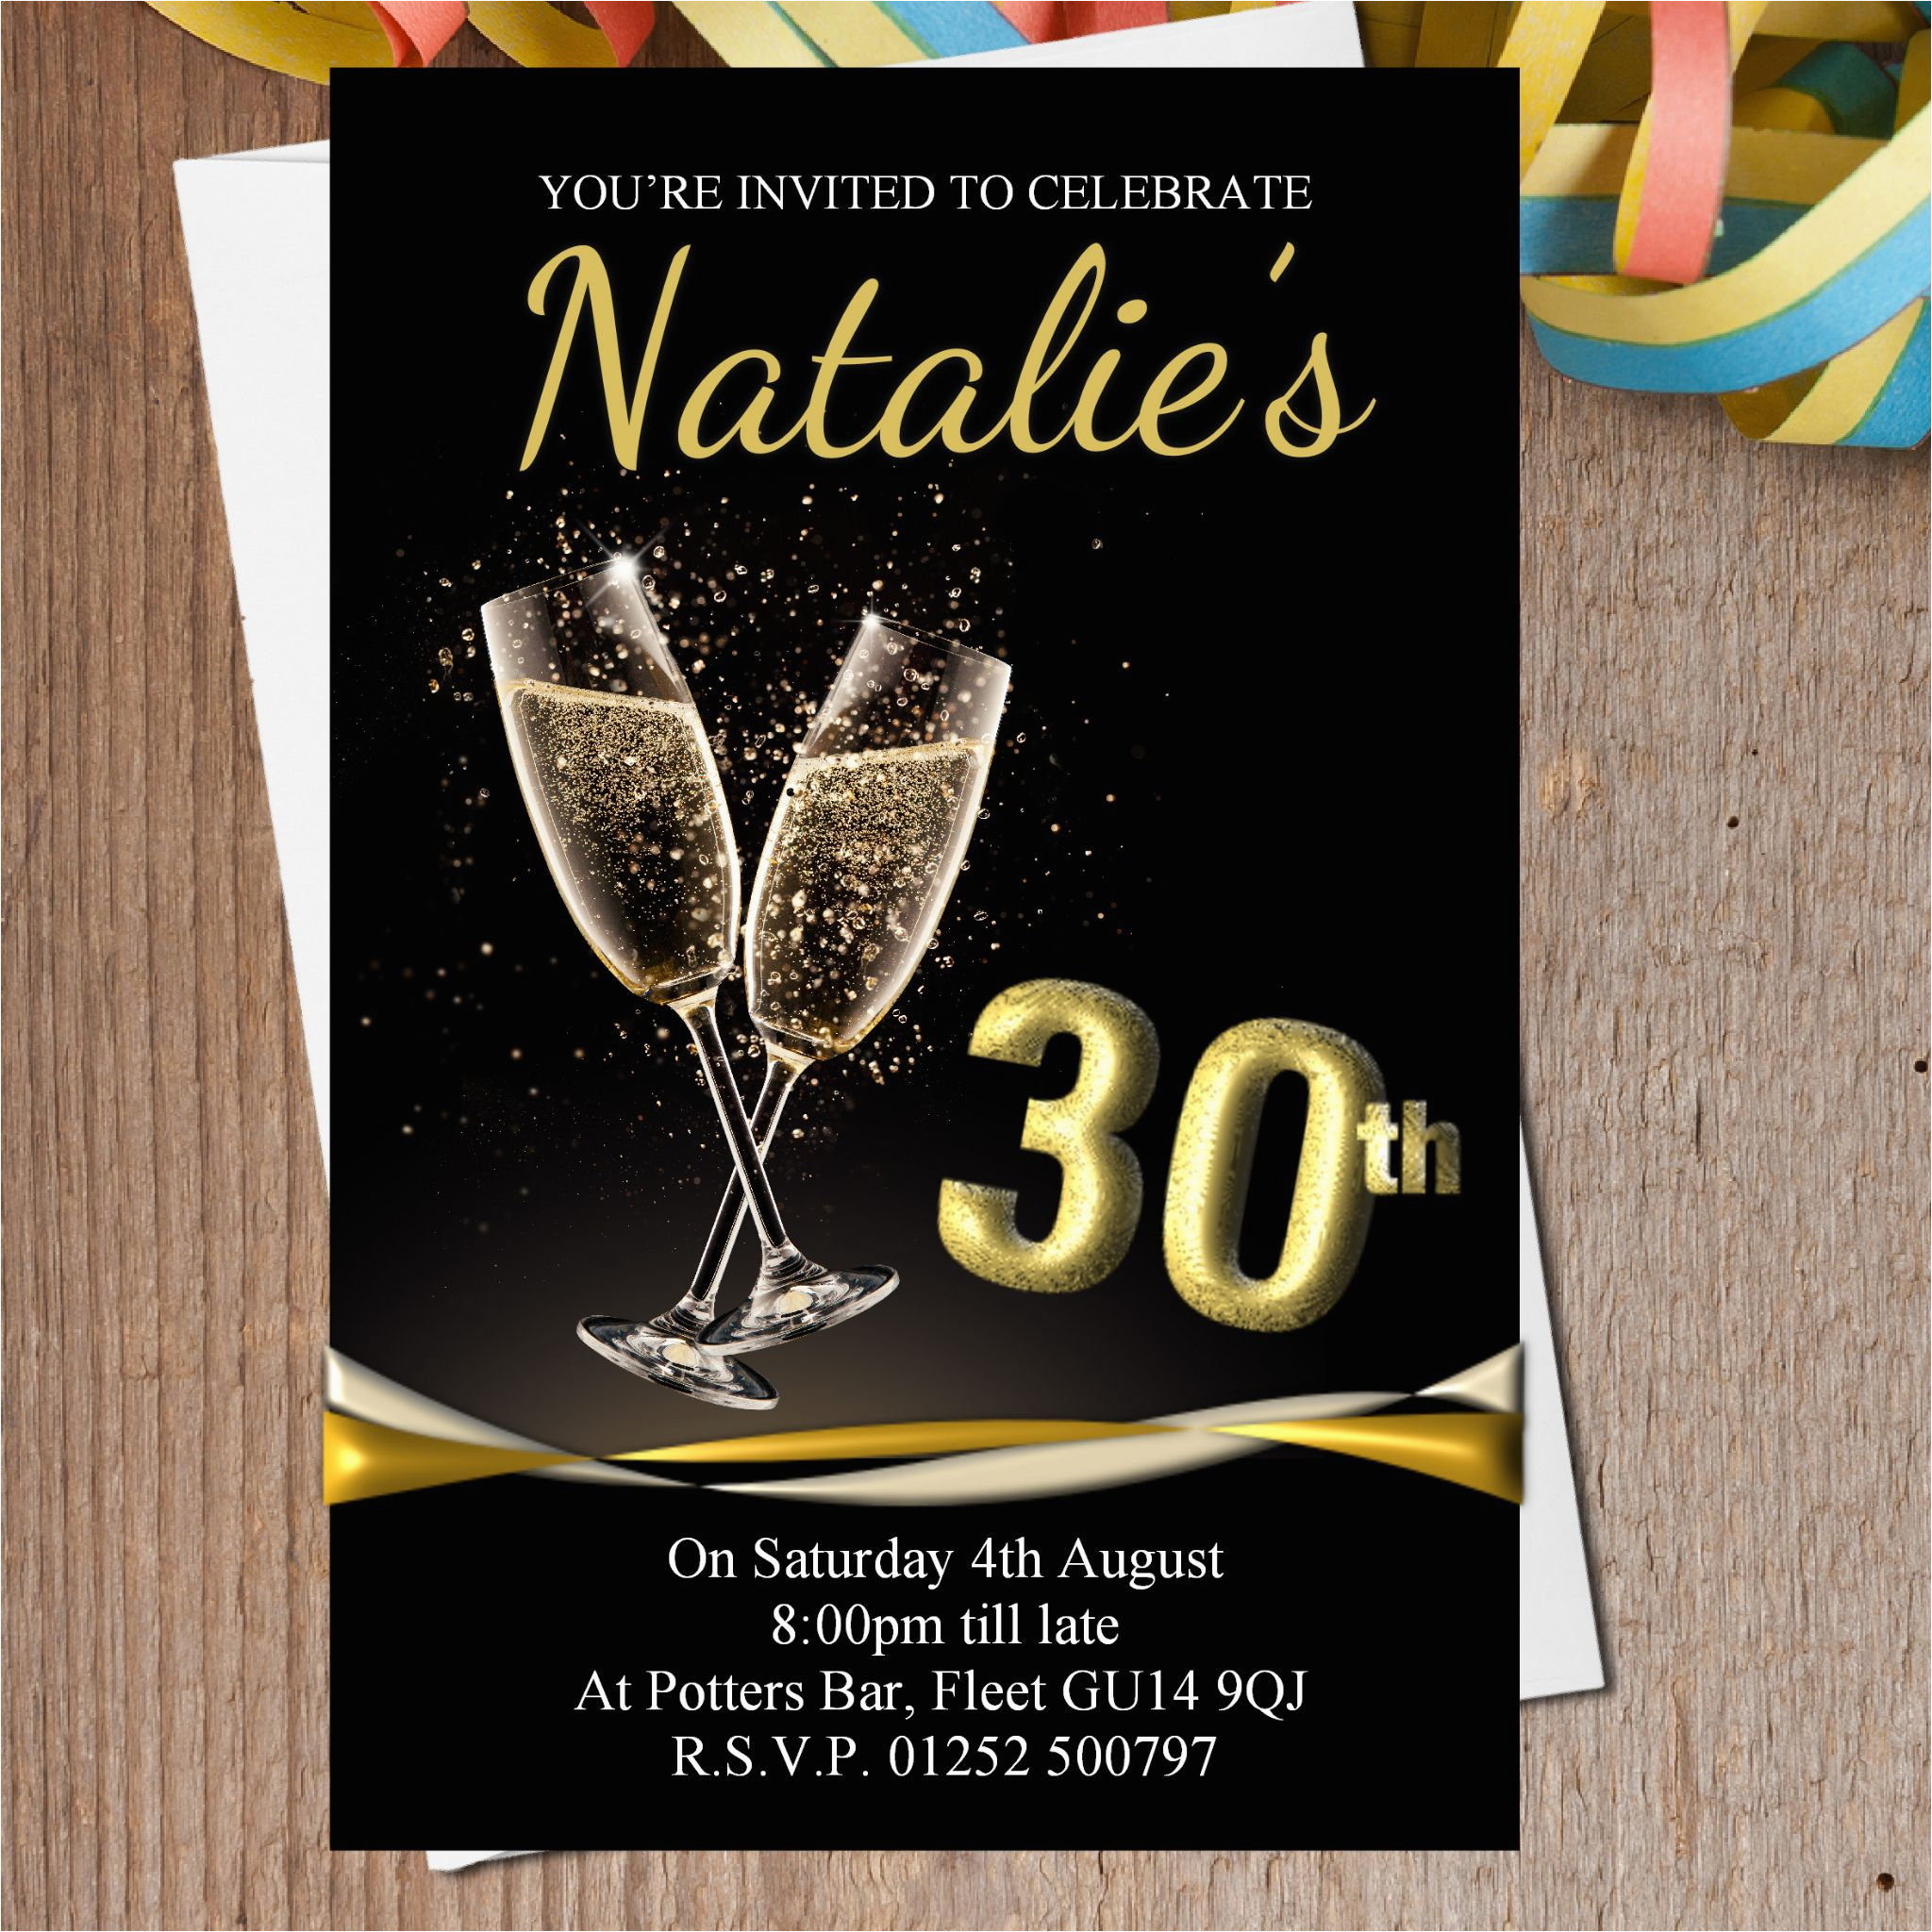 10 personalised black gold champagne birthday party invitations n196 any age 14151 p